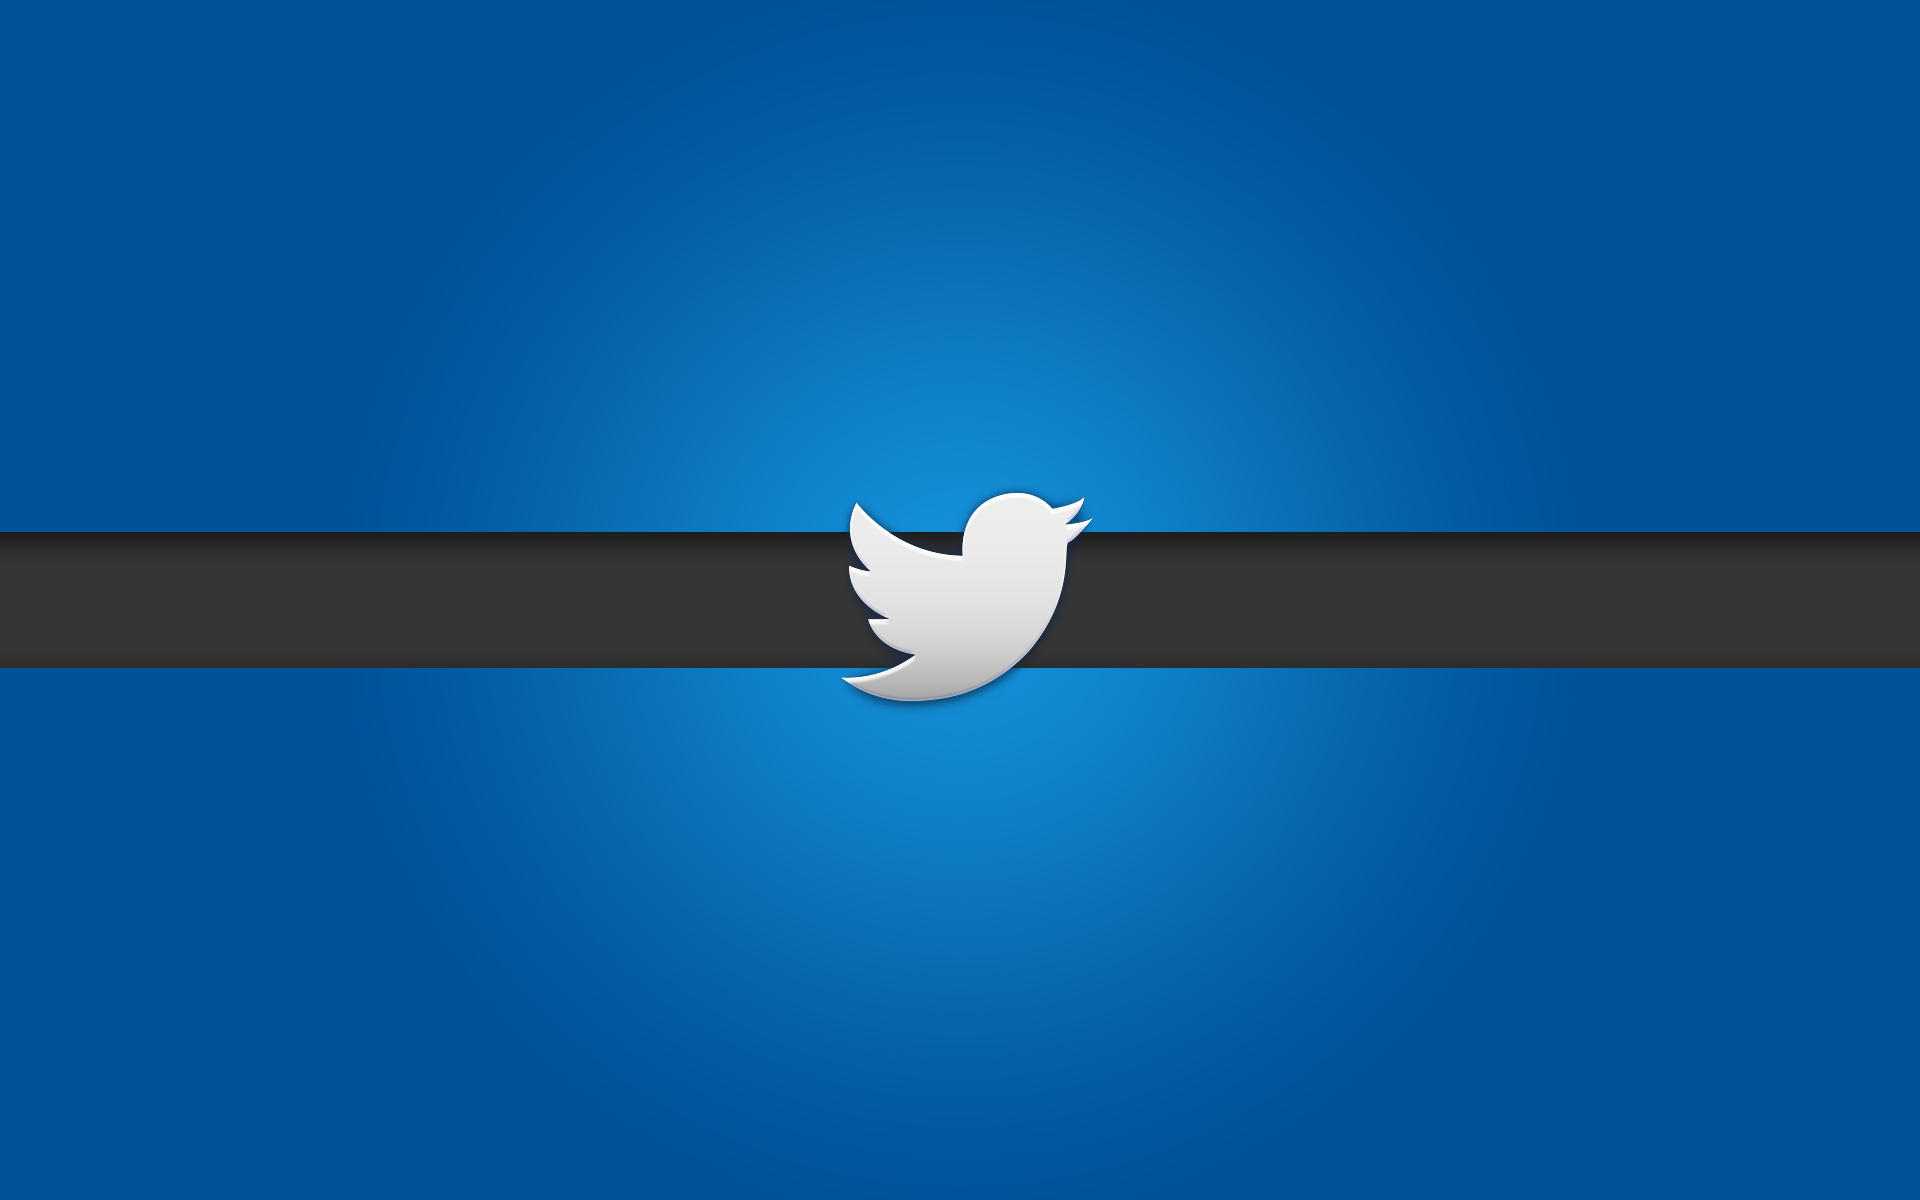 Twitter Logo Wallpapers, Pictures, Images